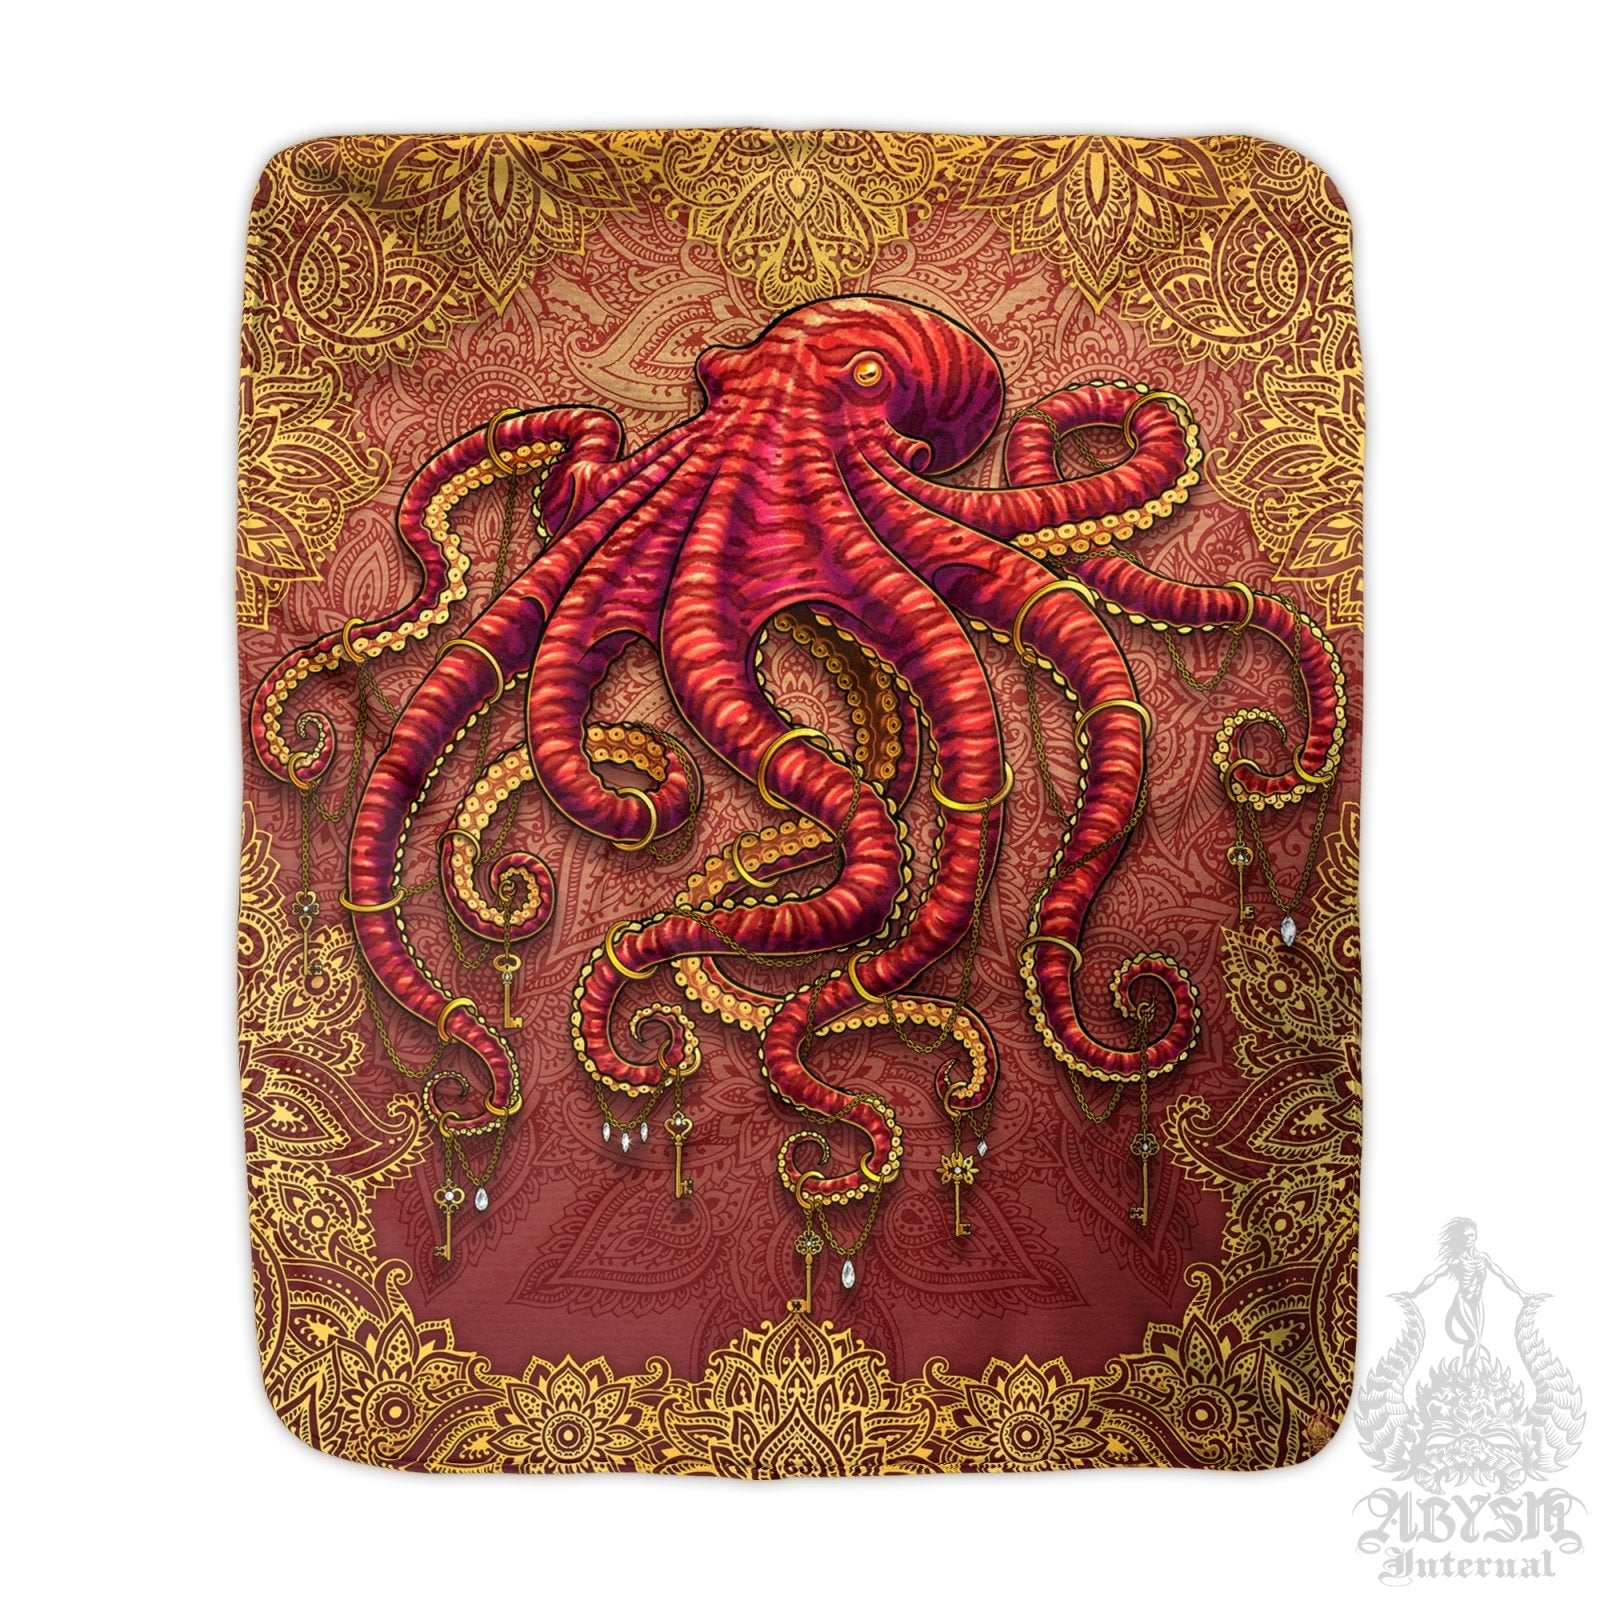 Boho Throw Fleece Blanket, Indie Gift, Beach Home Decor, Eclectic and Funky Gift - Octopus, Mandalas - Abysm Internal